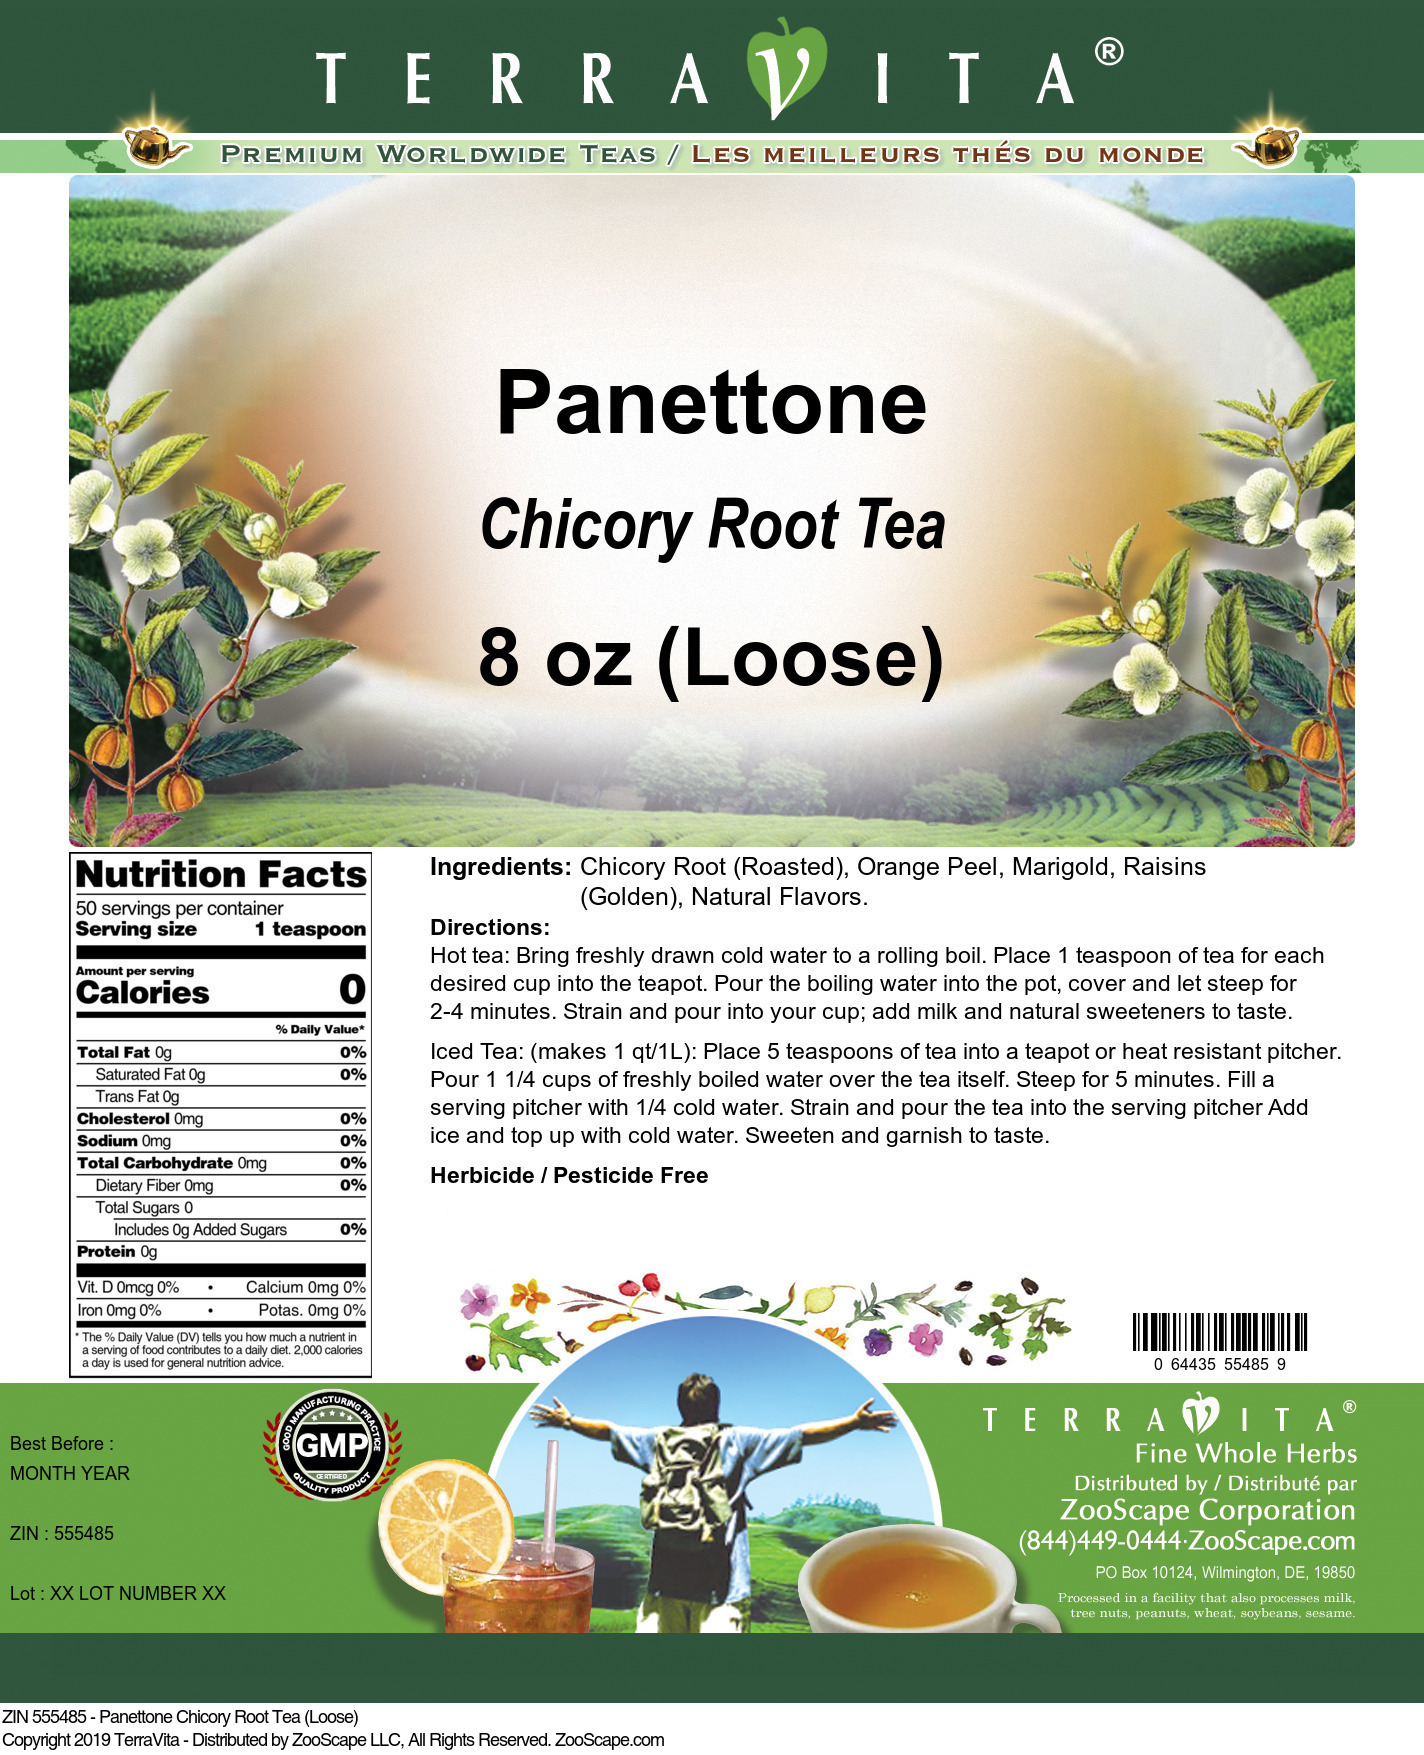 Panettone Chicory Root Tea (Loose) - Label